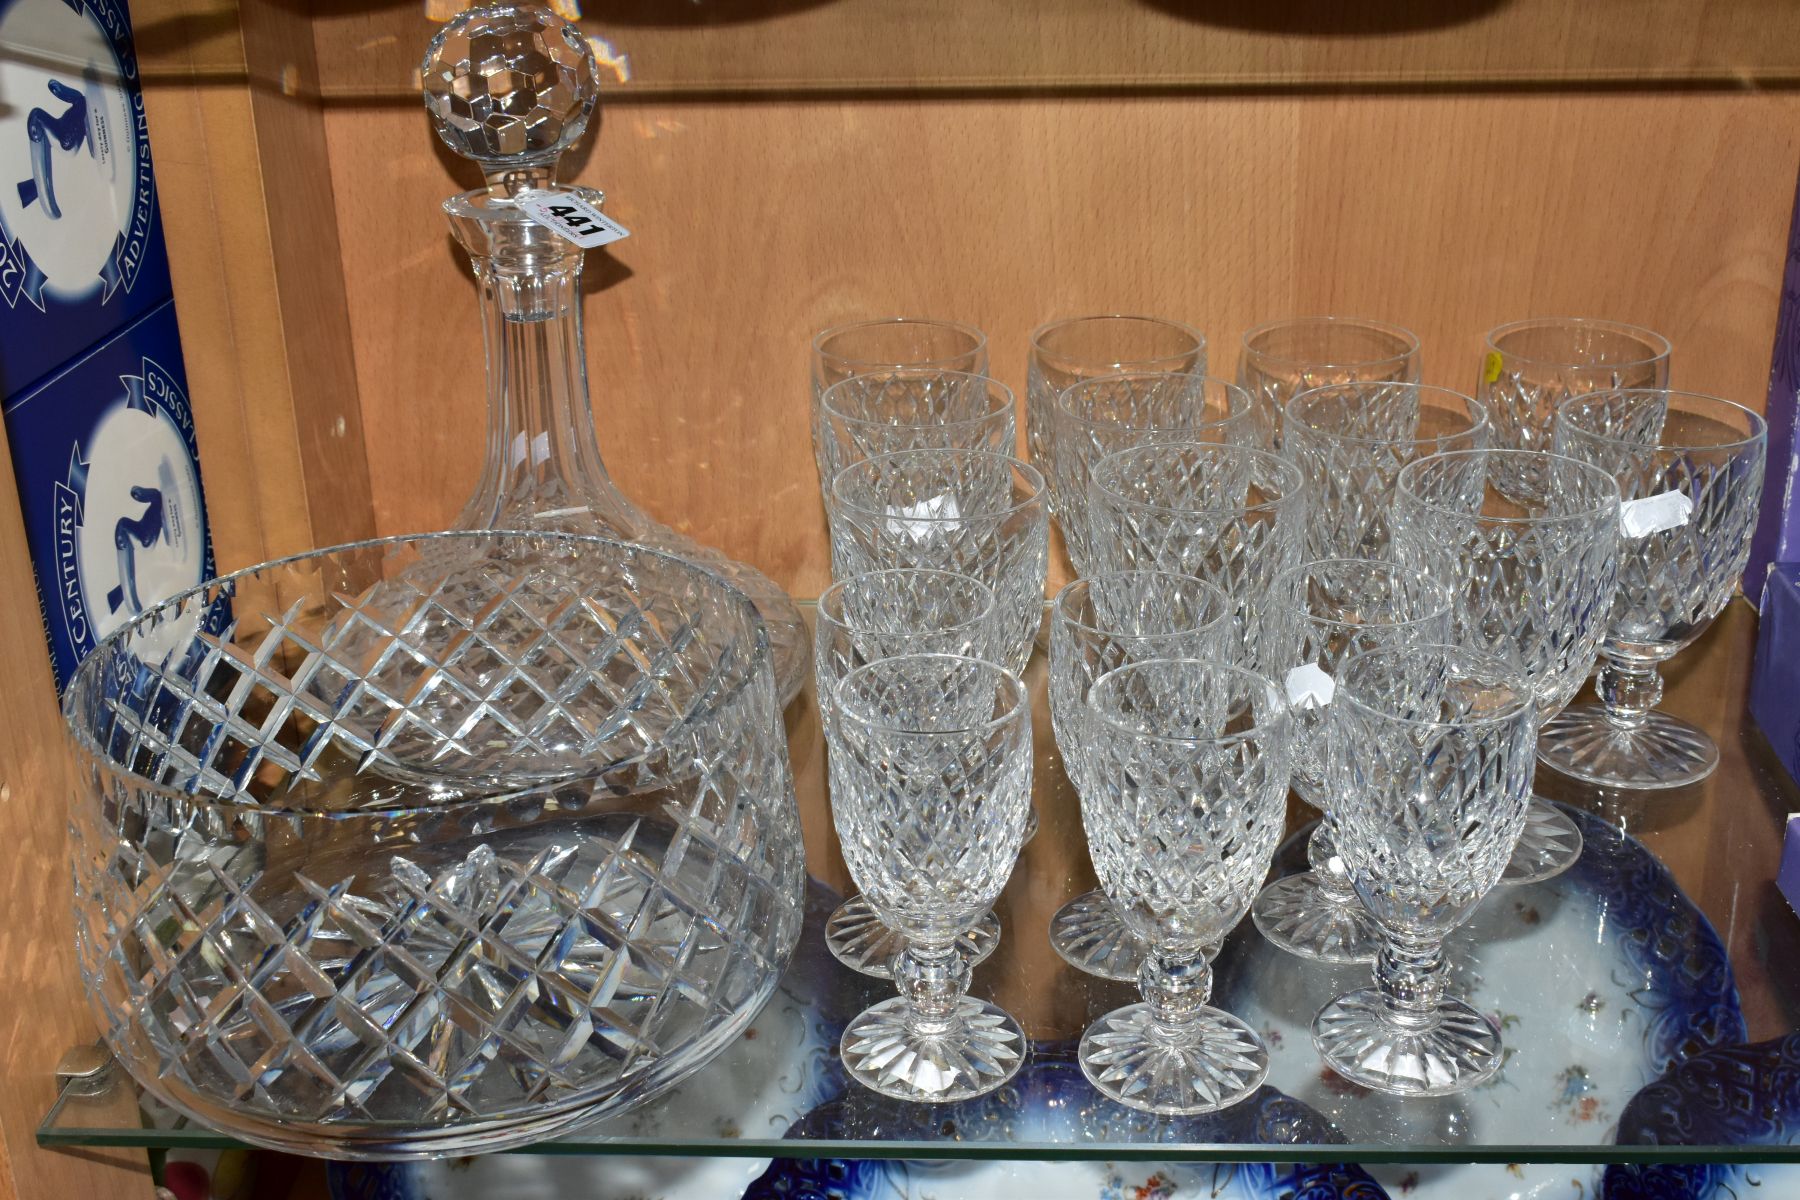 A WATERFORD CRYSTAL SHIPS DECANTER AND MATCHING WATERFORD GLASSES, 'Boyne' pattern, to include a set